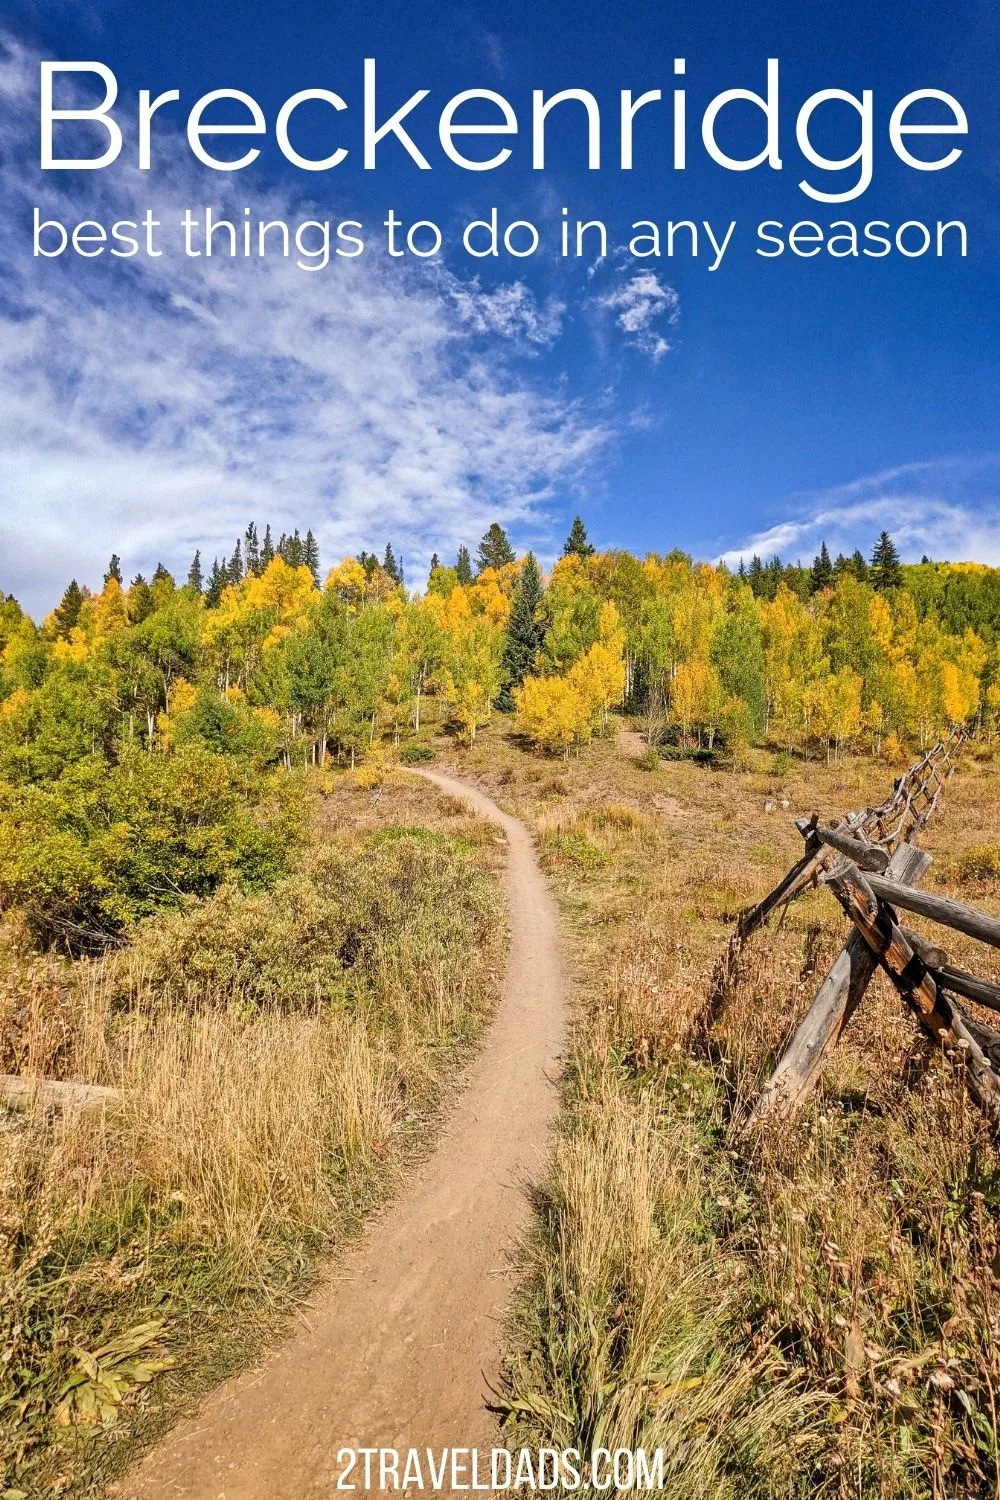 There are things to do in Breckenridge all year, not just during ski season. From epic hiking to a beautiful historic downtown, mine country to horseback riding, there are so many things to do for any season or type of traveler.